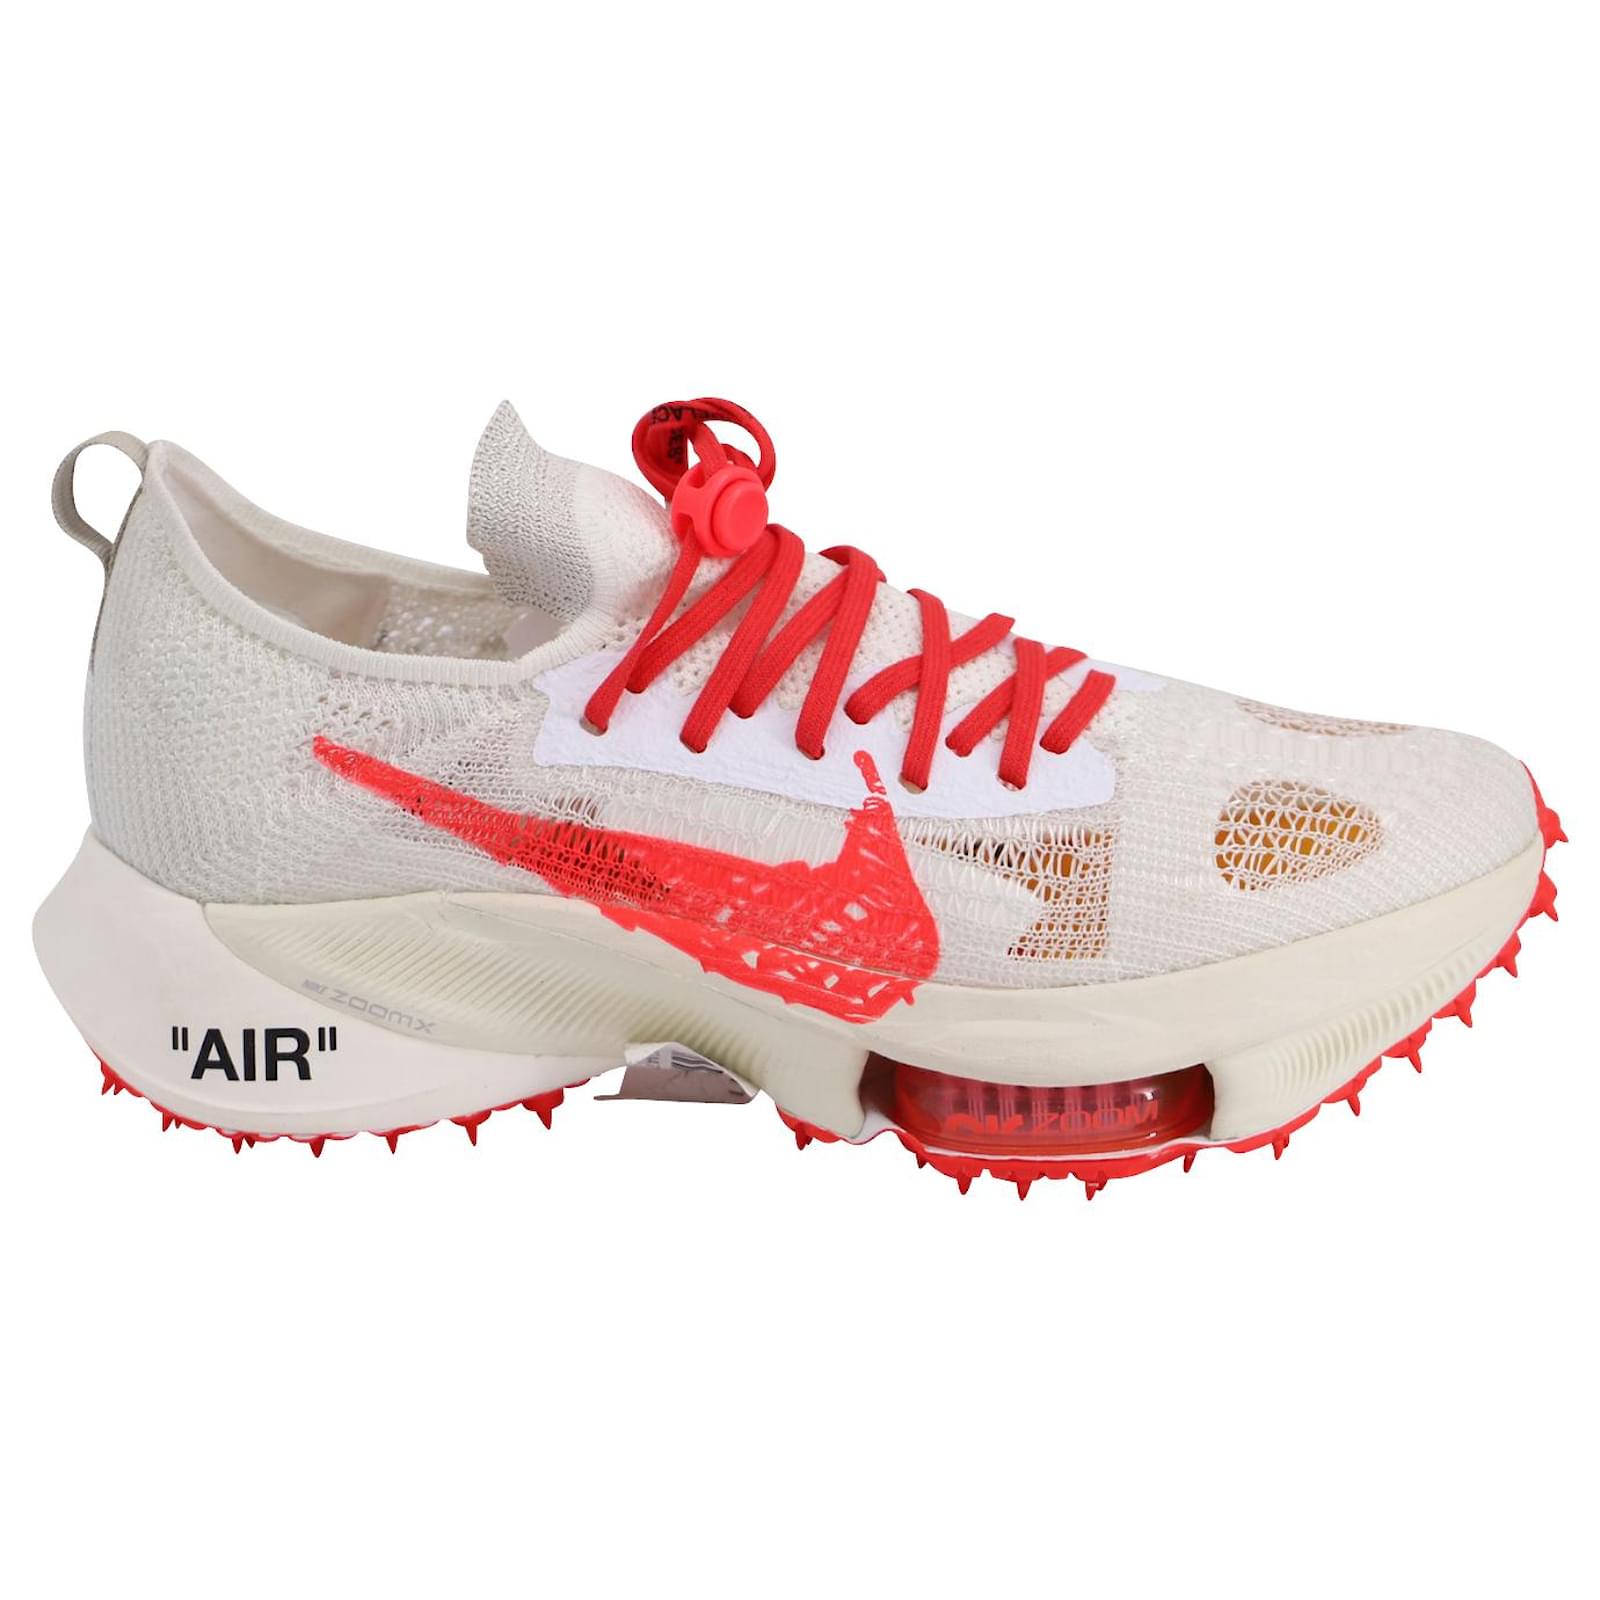 Off-White x Nike Air Zoom Tempo Next Sneakers in White and Orange Polyester